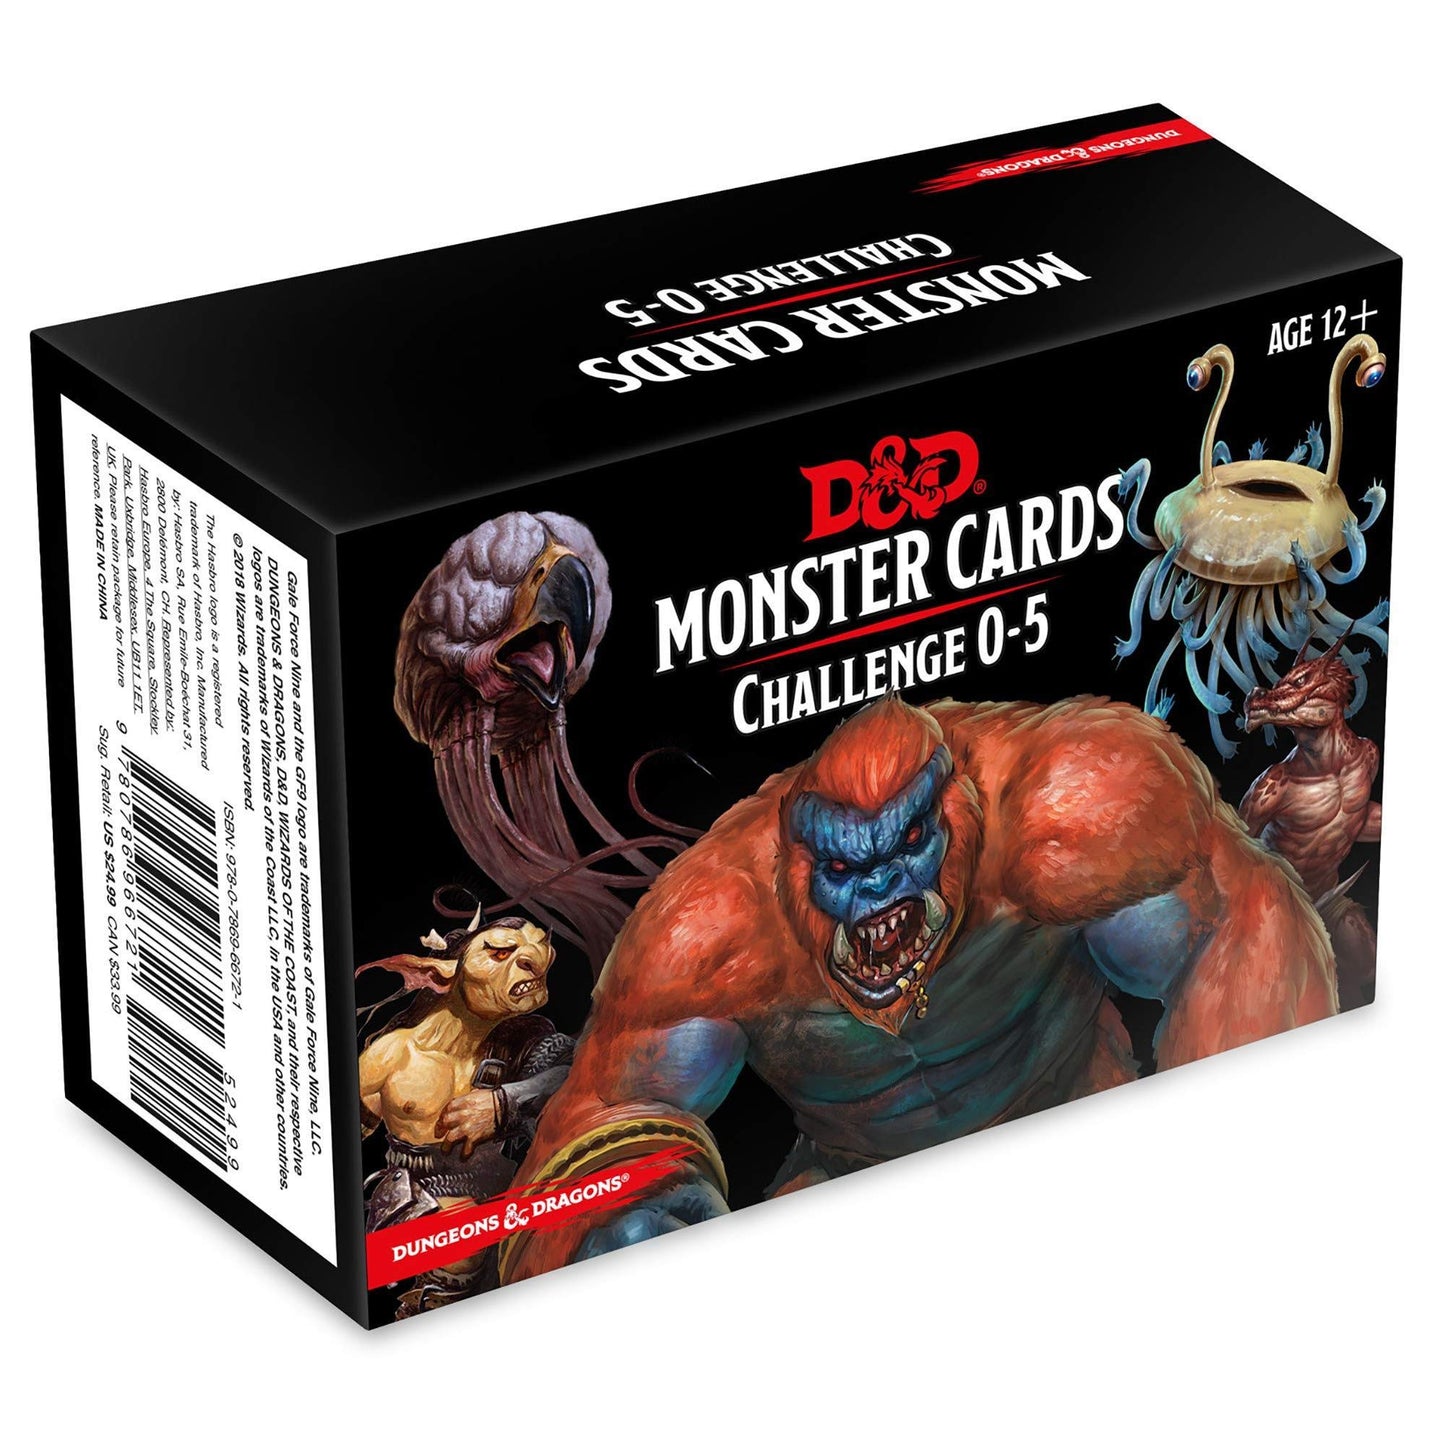 Dungeons & Dragons Spellbook Cards: Monsters Challenge Level 0-5